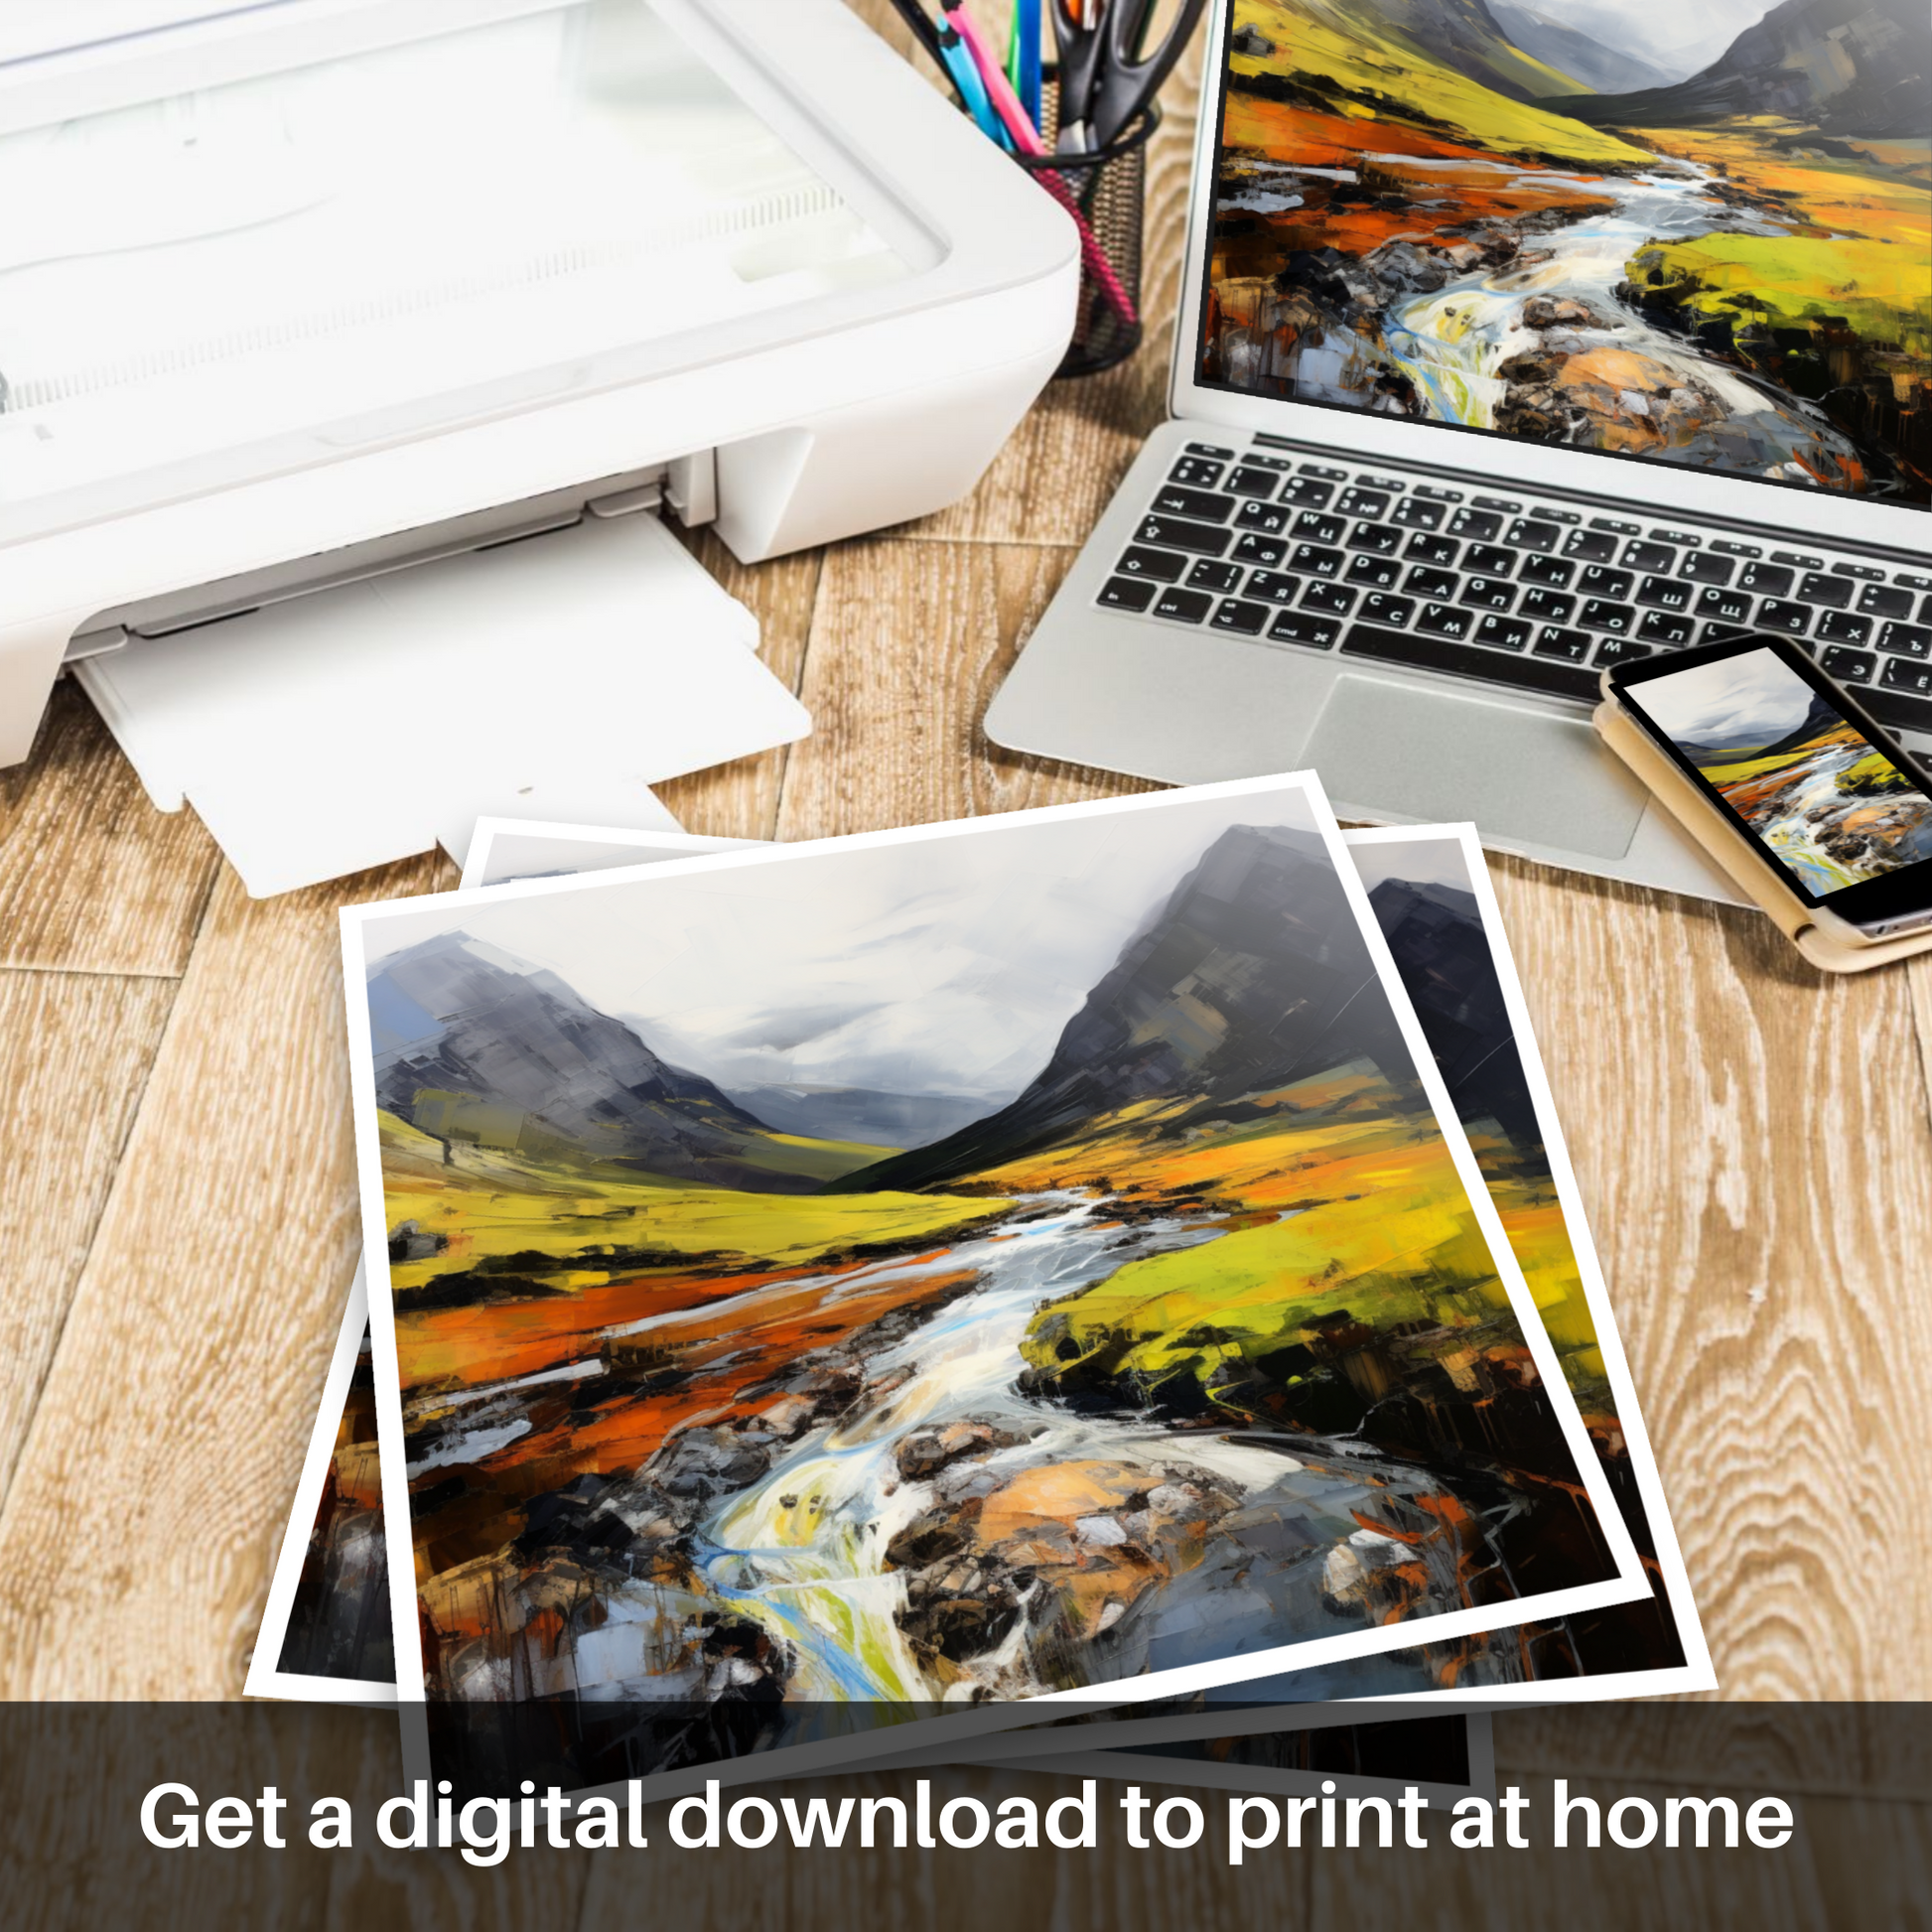 Downloadable and printable picture of Glen Coe, Highlands